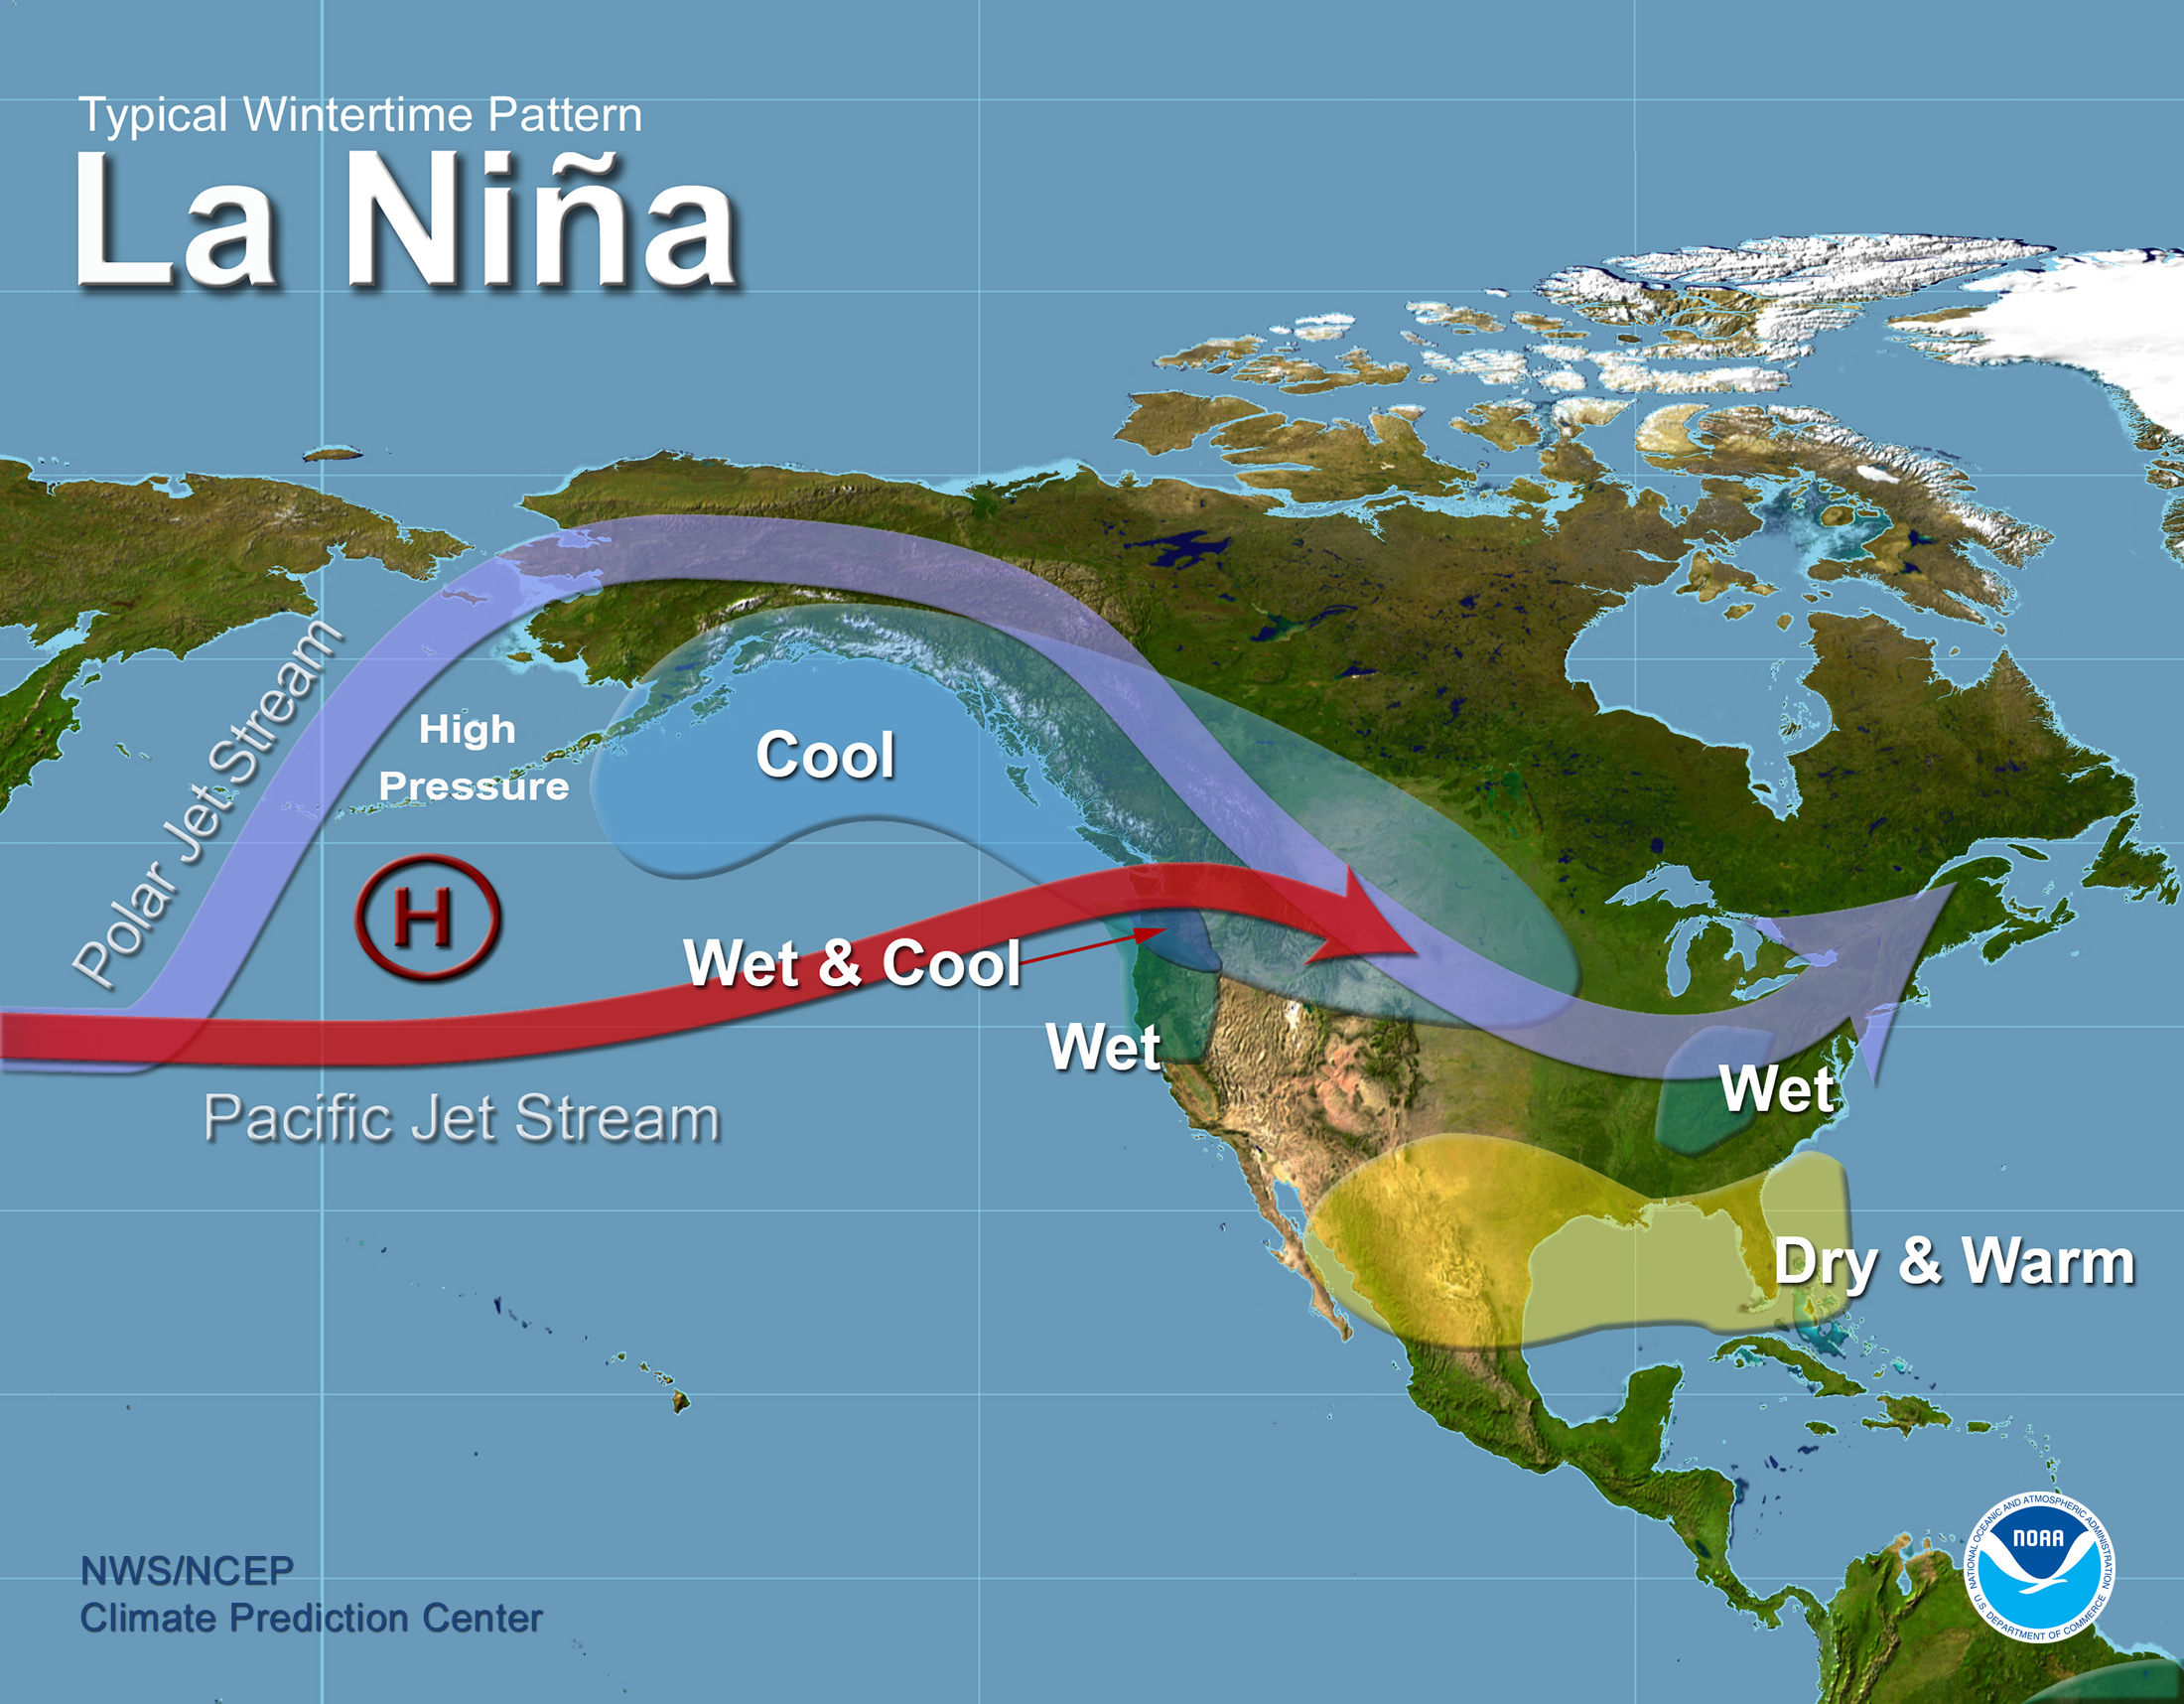 La Niña Climate Season Brings Cooler, Wetter Conditions to Parts of the World